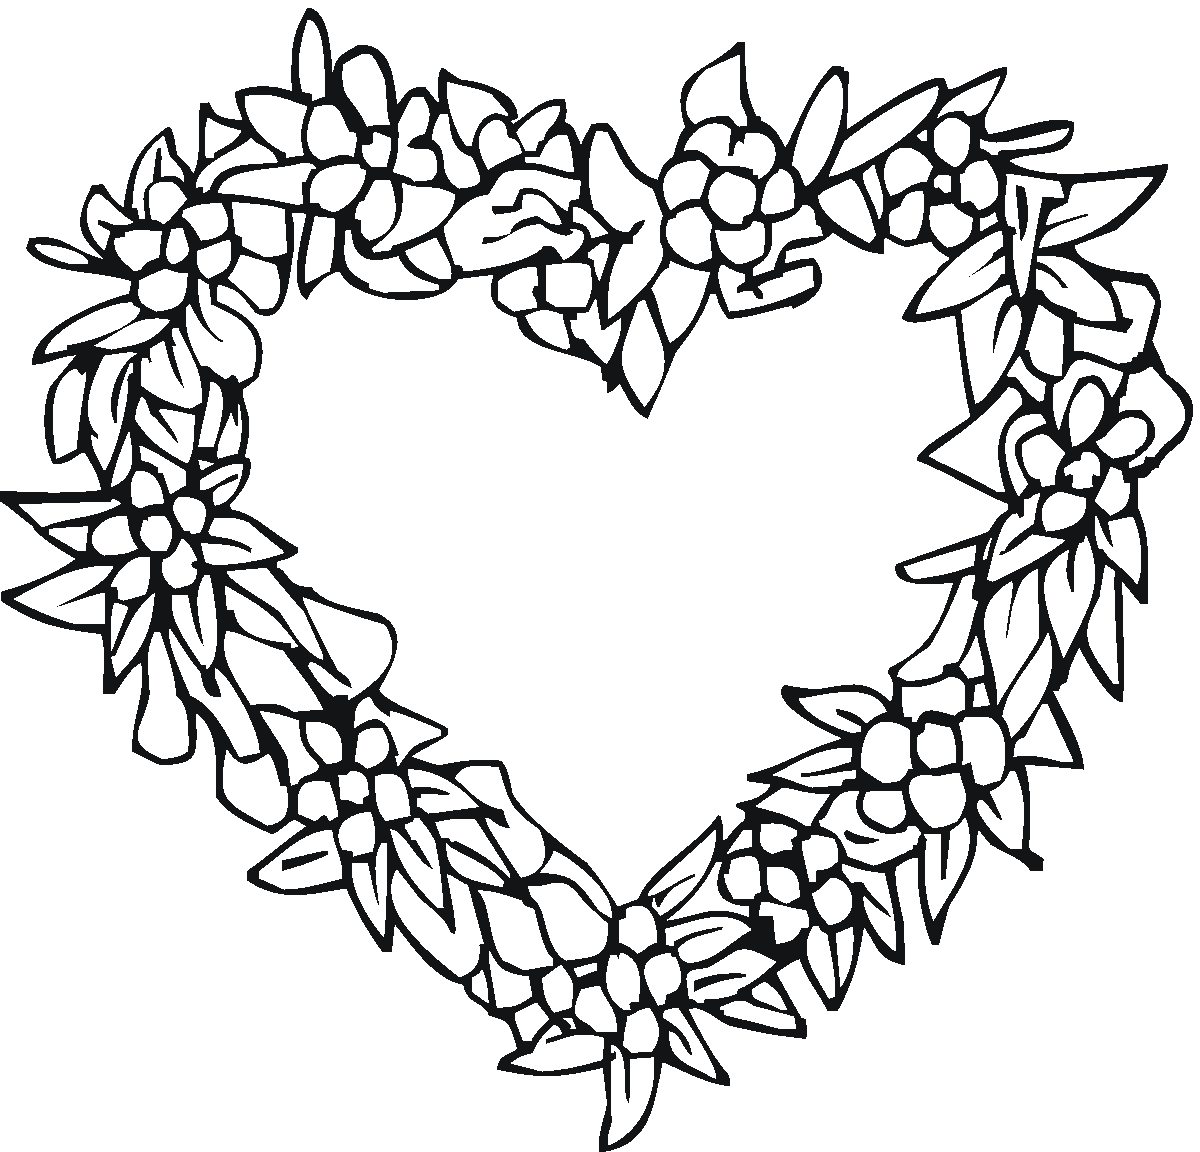 Cool Heart Coloring Pages - ClipArt Best